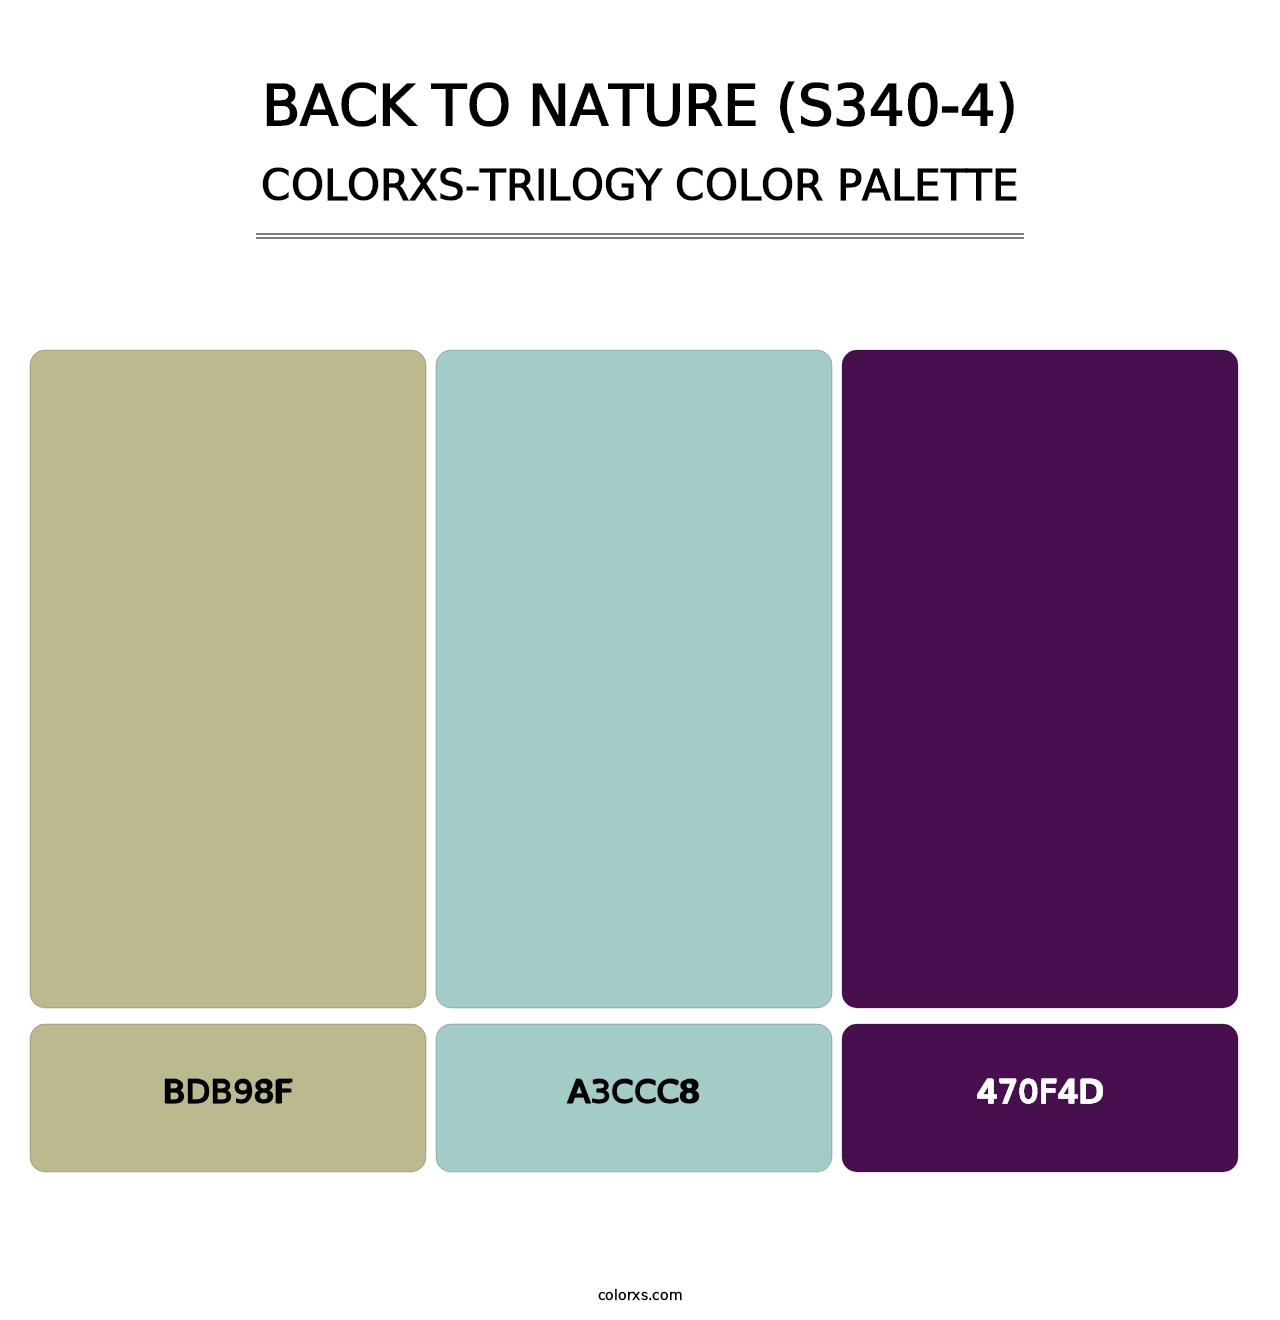 Back To Nature (S340-4) - Colorxs Trilogy Palette